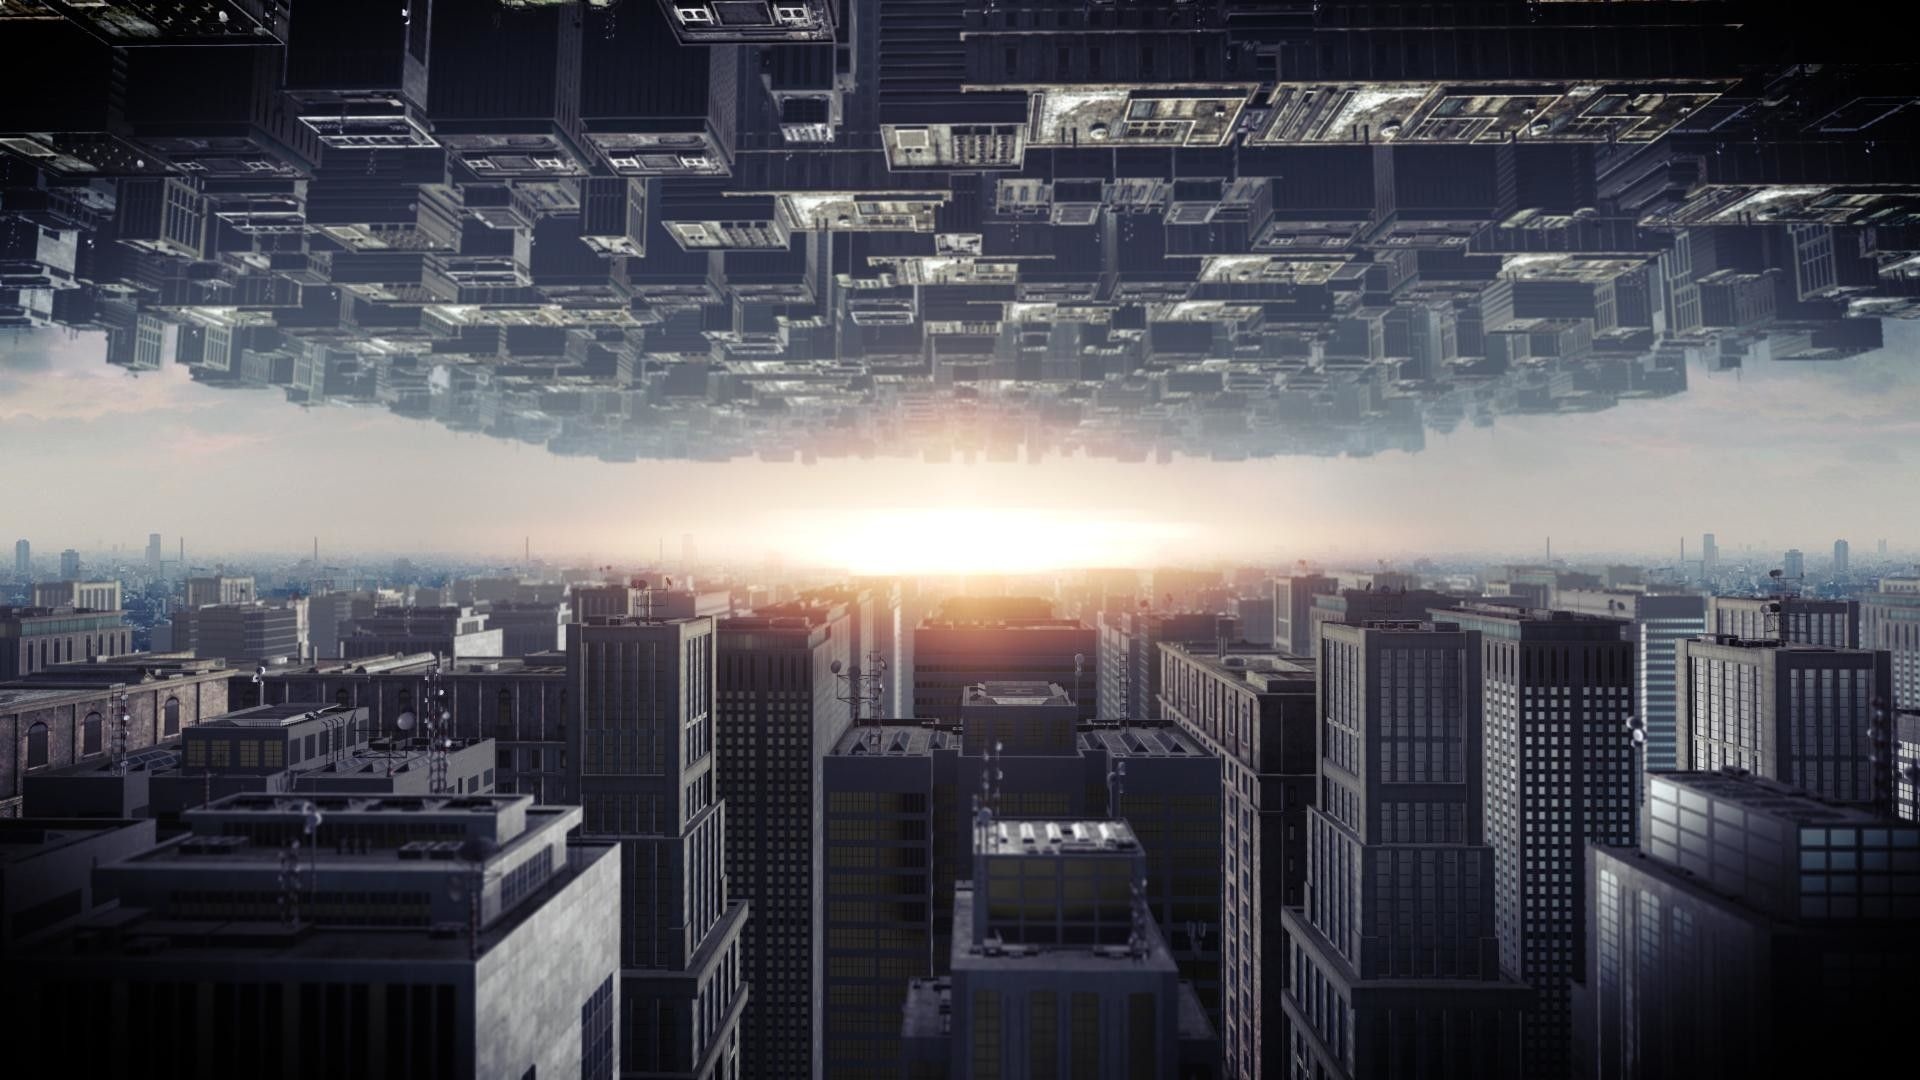 Inception: A sci-fi action-thriller written, produced, and directed by Christopher Nolan. 1920x1080 Full HD Wallpaper.